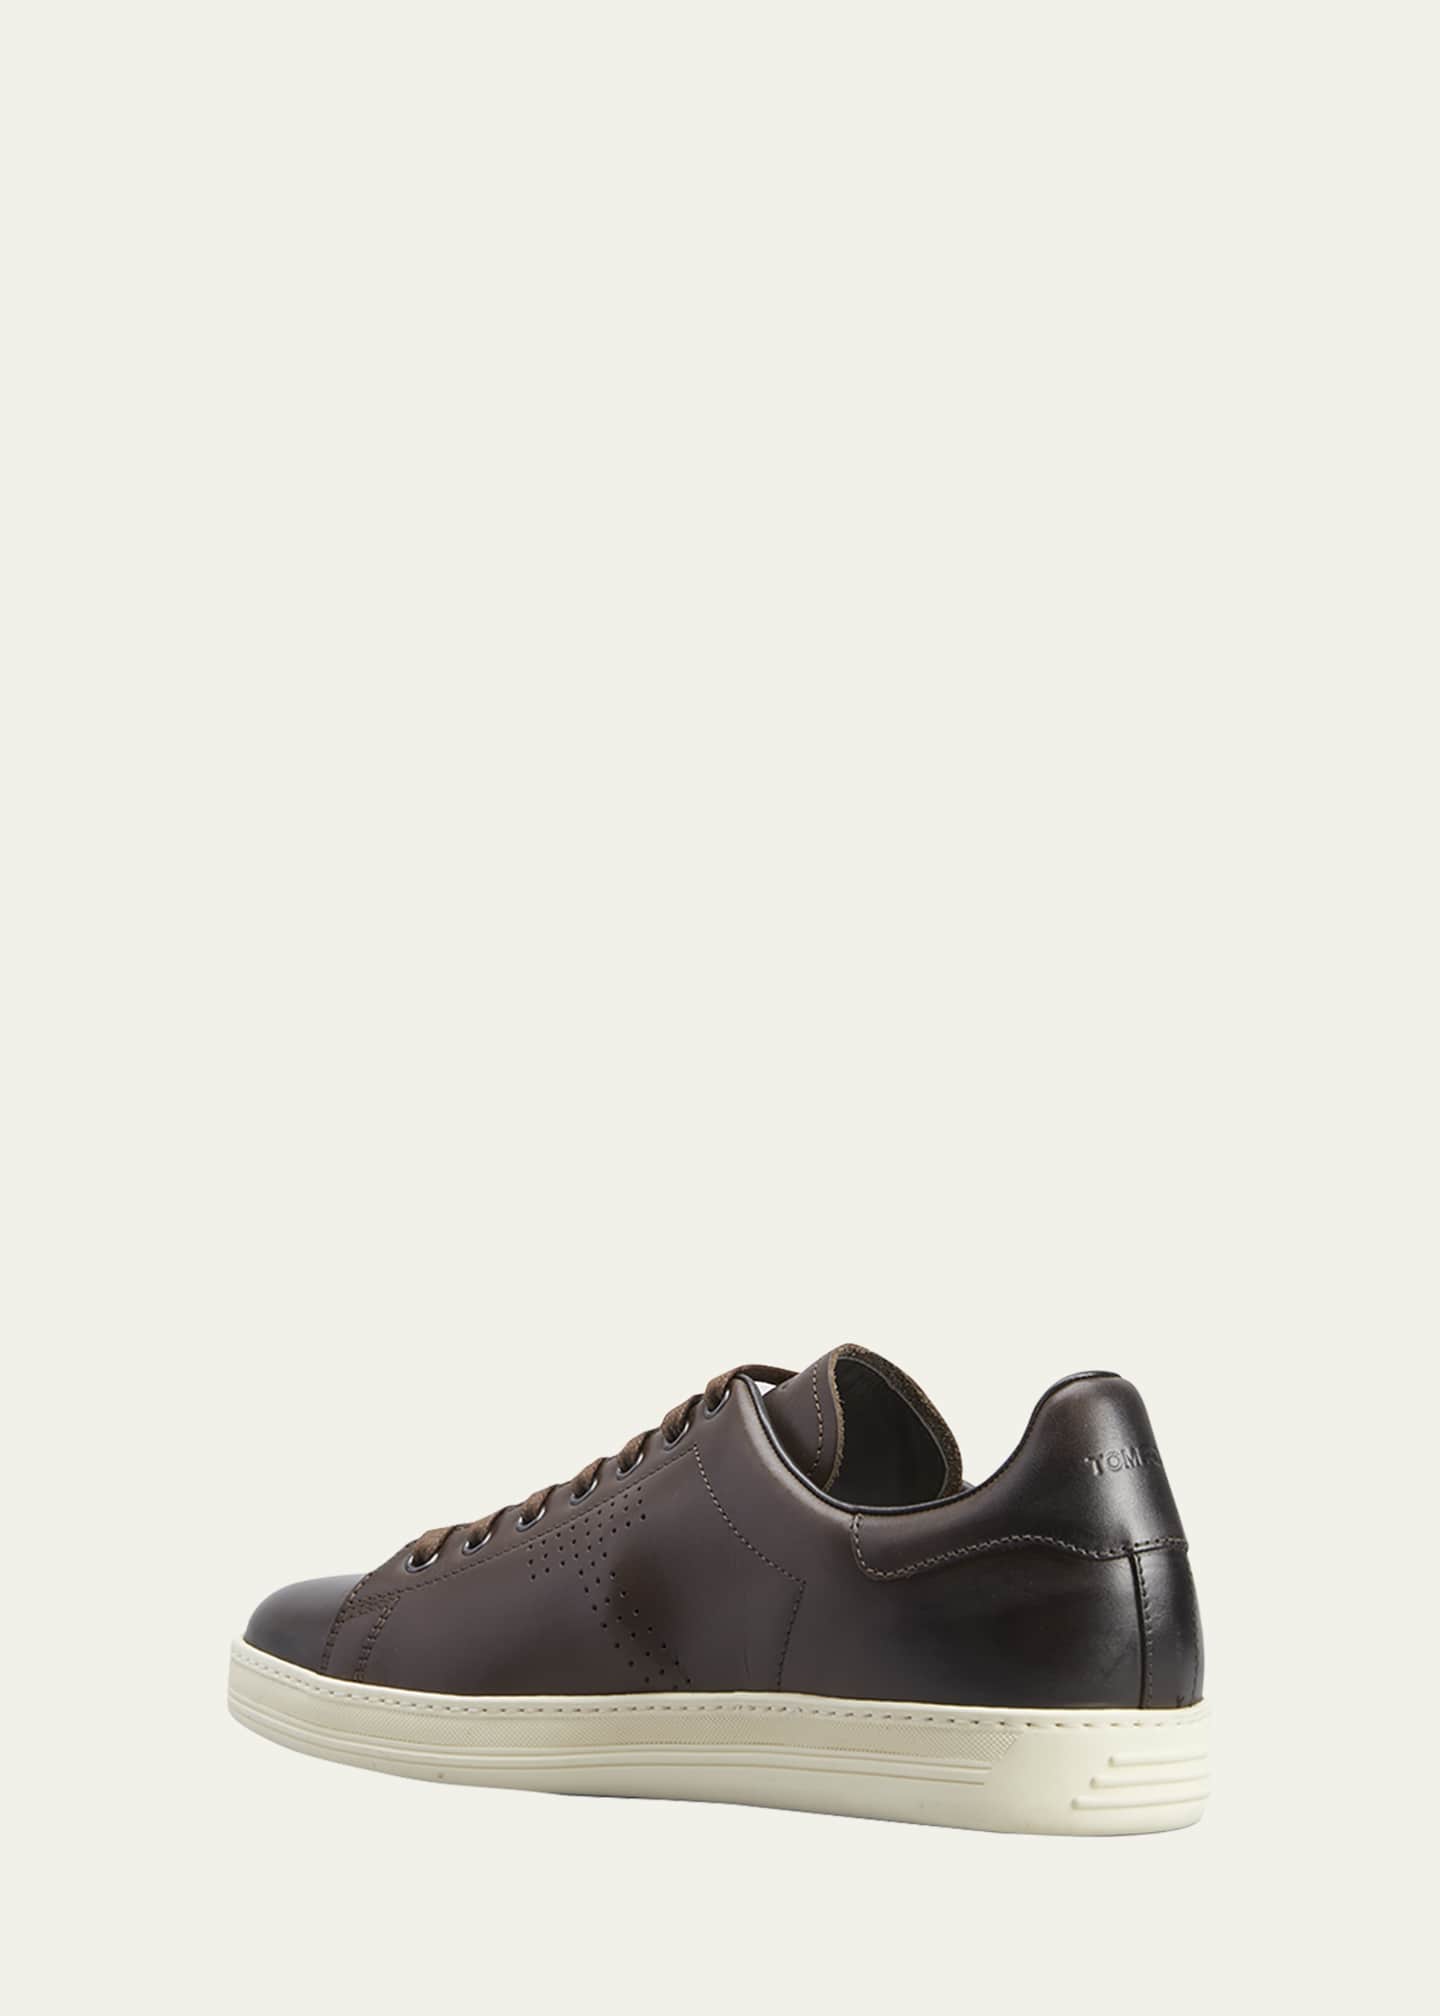 TOM FORD Men's Warwick Burnished Leather Low-Top Sneakers - Bergdorf ...